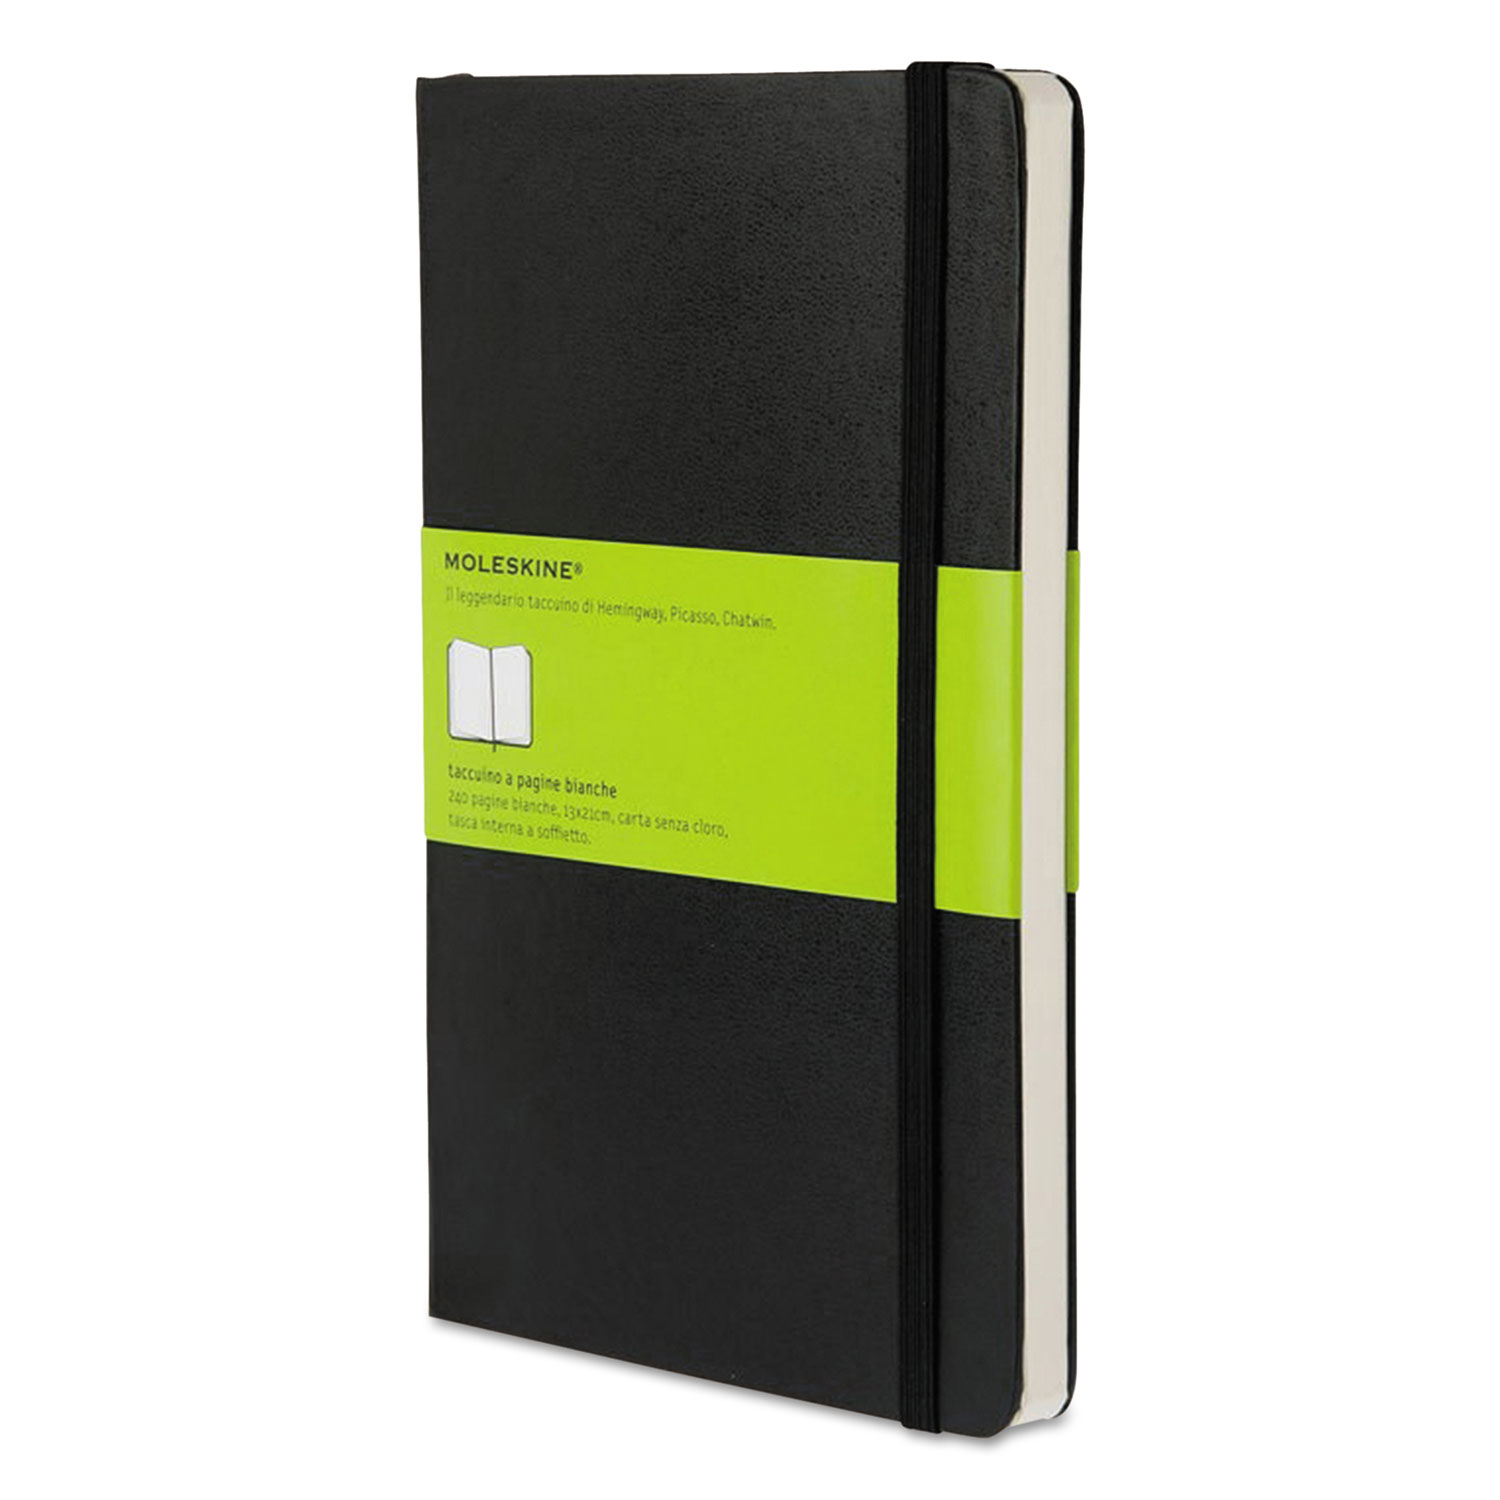  Moleskine 9788883701146 Hard Cover Notebook, Unruled, Black Cover, 8.25 x 5, 192 Sheets (HBGMBL17) 